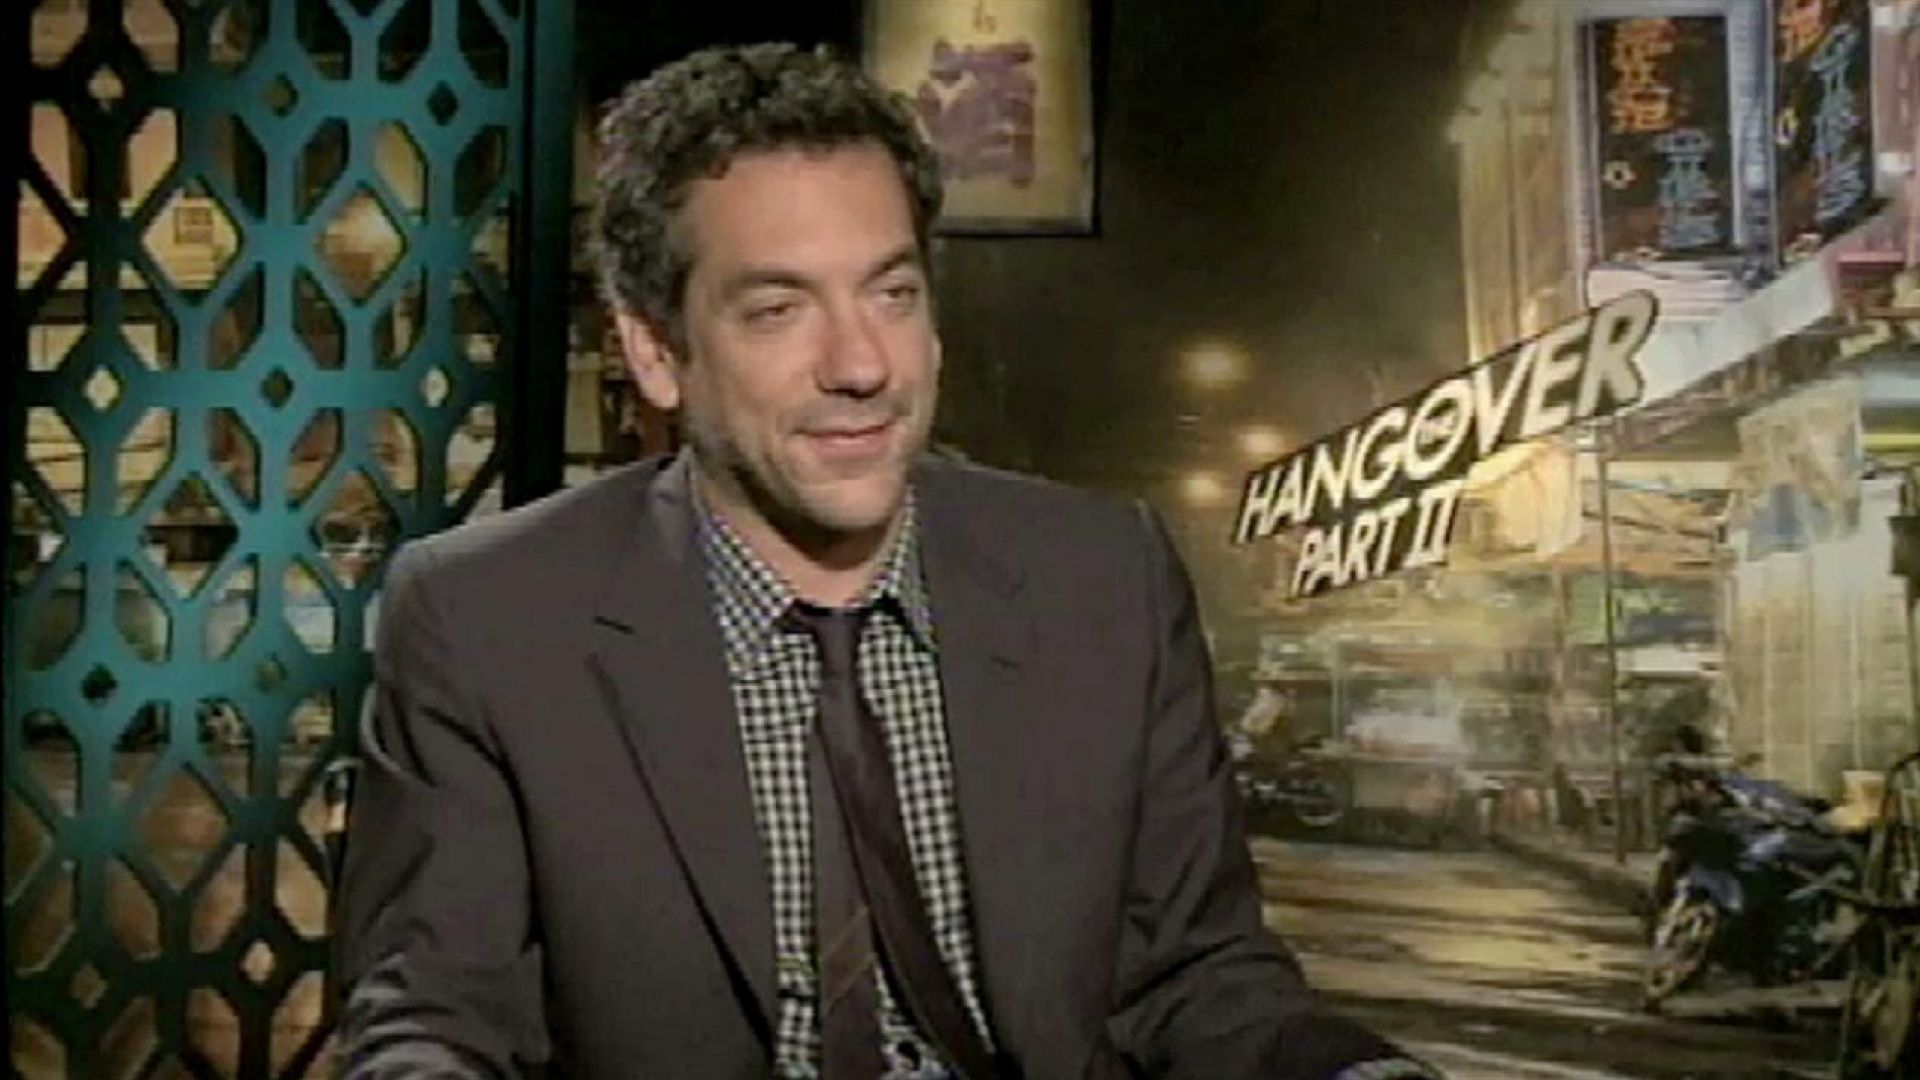 Todd Phillips talks about directing The Hangover Part II